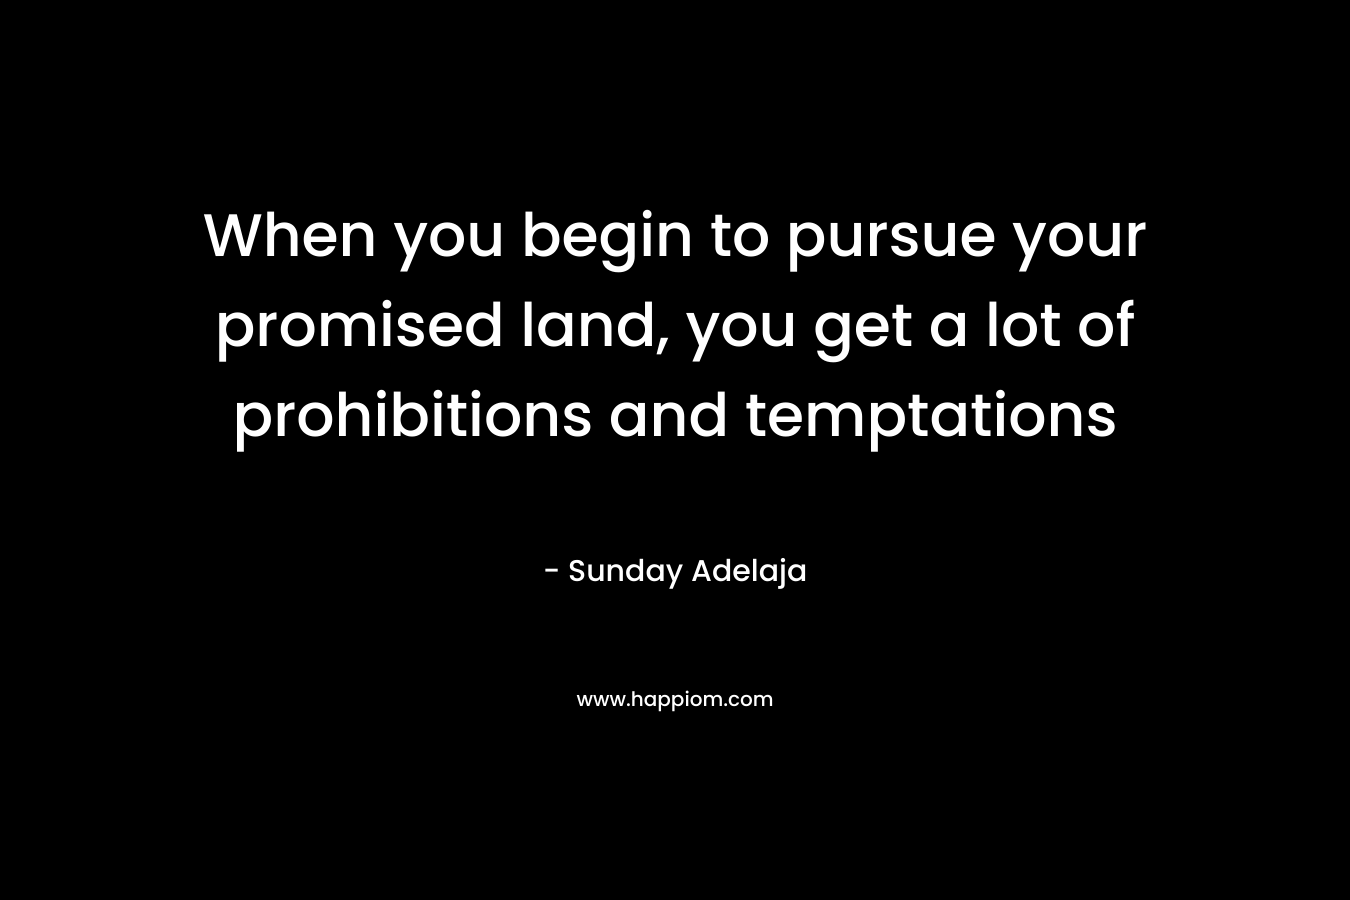 When you begin to pursue your promised land, you get a lot of prohibitions and temptations